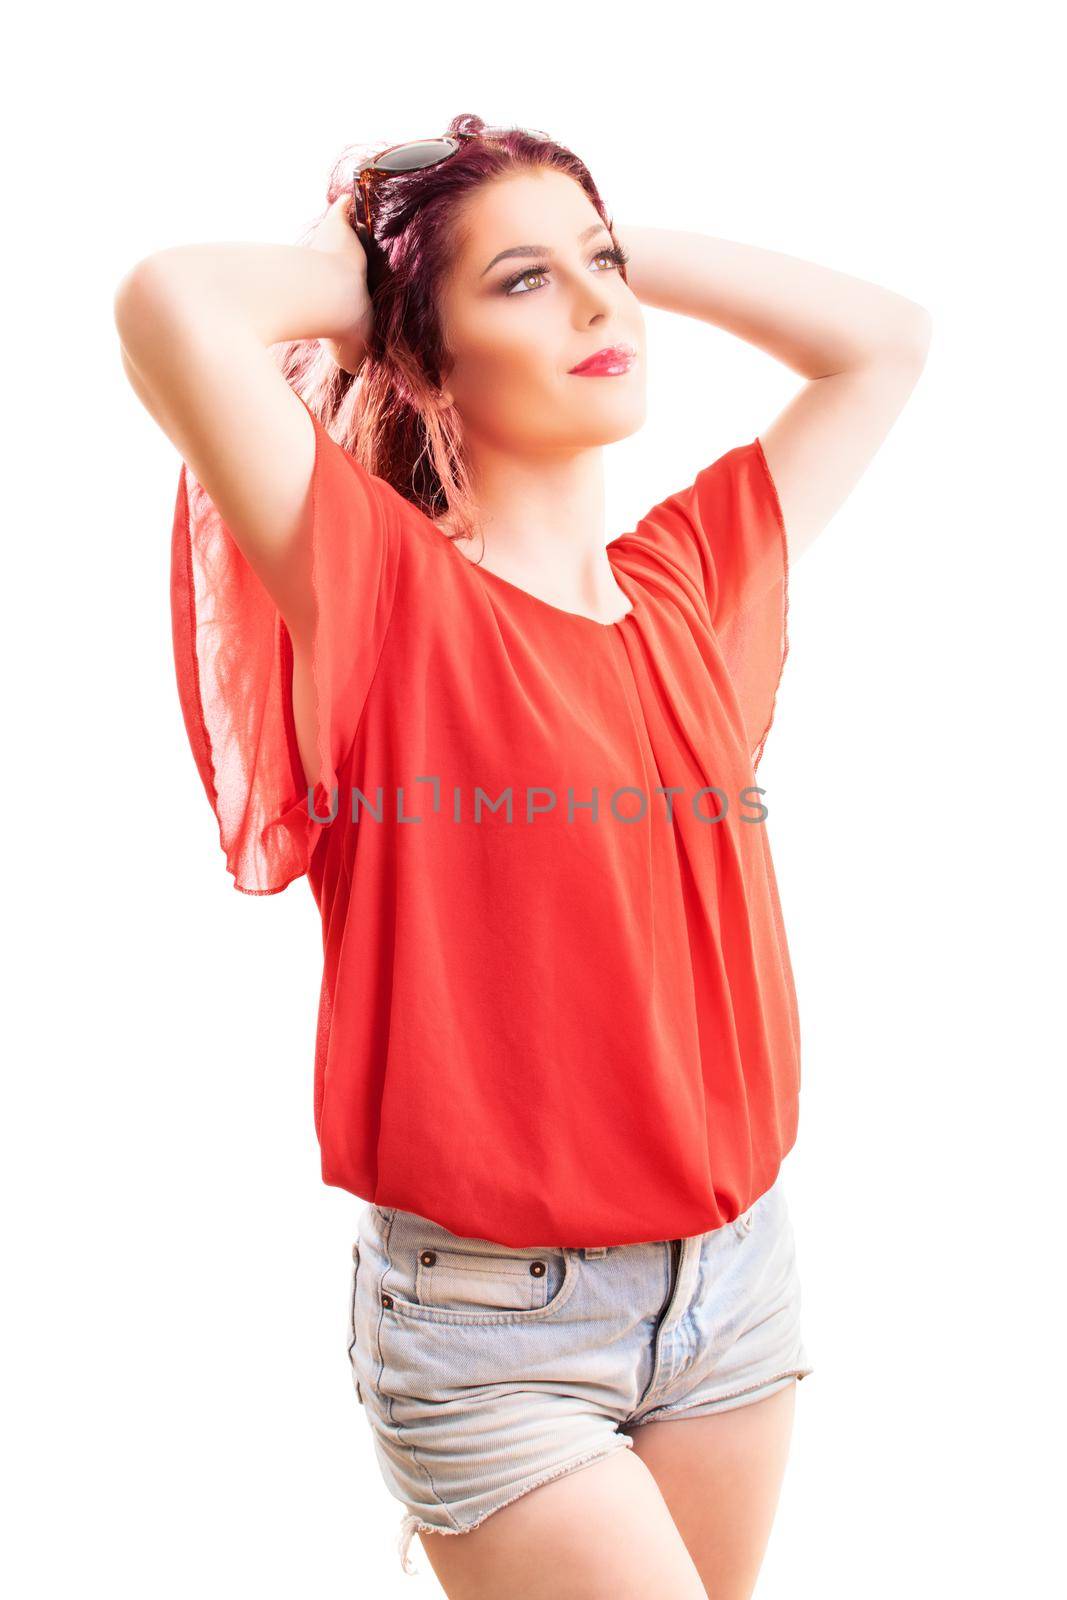 Beautiful redhead woman with long wavy hair in a fashionable summer outfit looking in the distance, isolated on white background. Summer, enjoying concept.